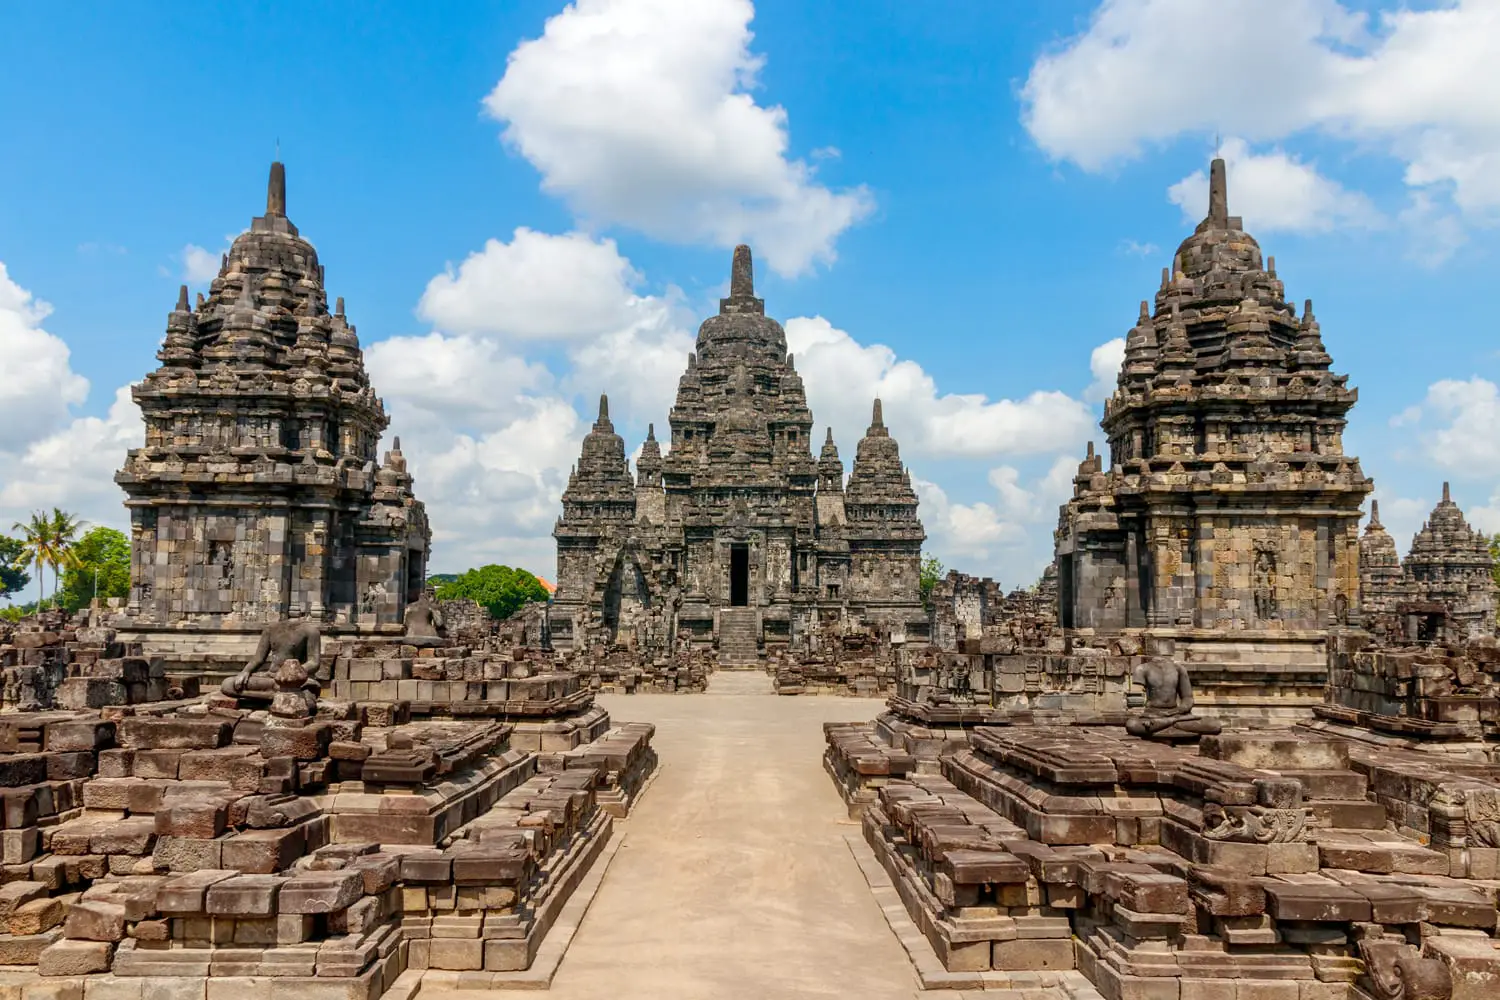 View of the Sewu temple complex under a blue sky with clouds. The Sewu temple is the second largest Buddhist temple of Indonesia and is located near the famous Prambanan temple.